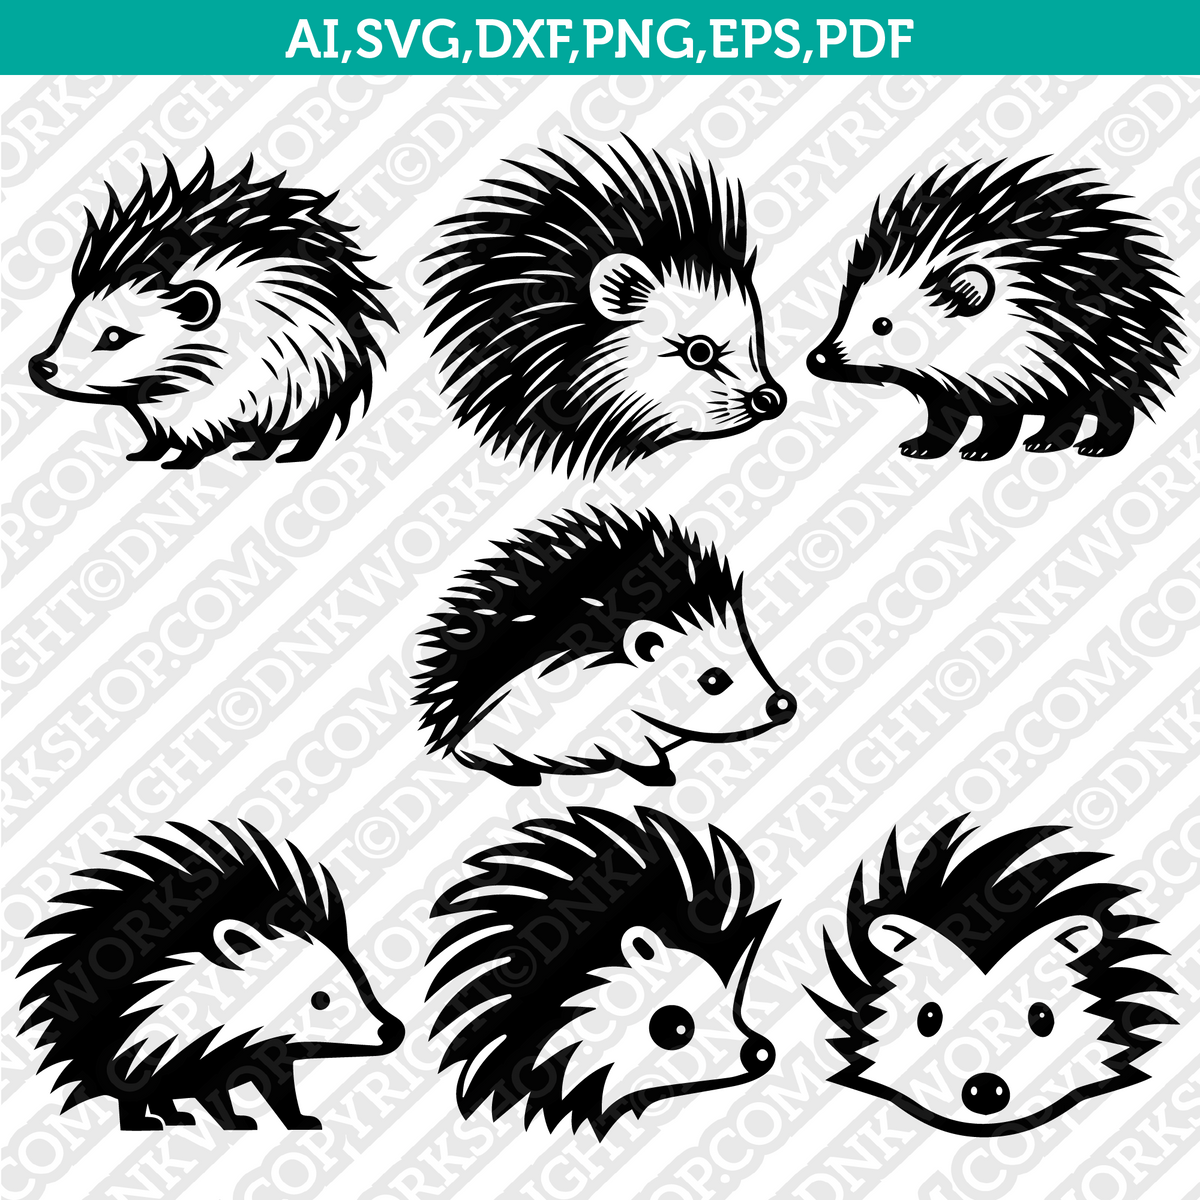 Looking Sharp with Cute Porcupine Clipart Digital Download SVG PNG JPG PDF  Cut Files